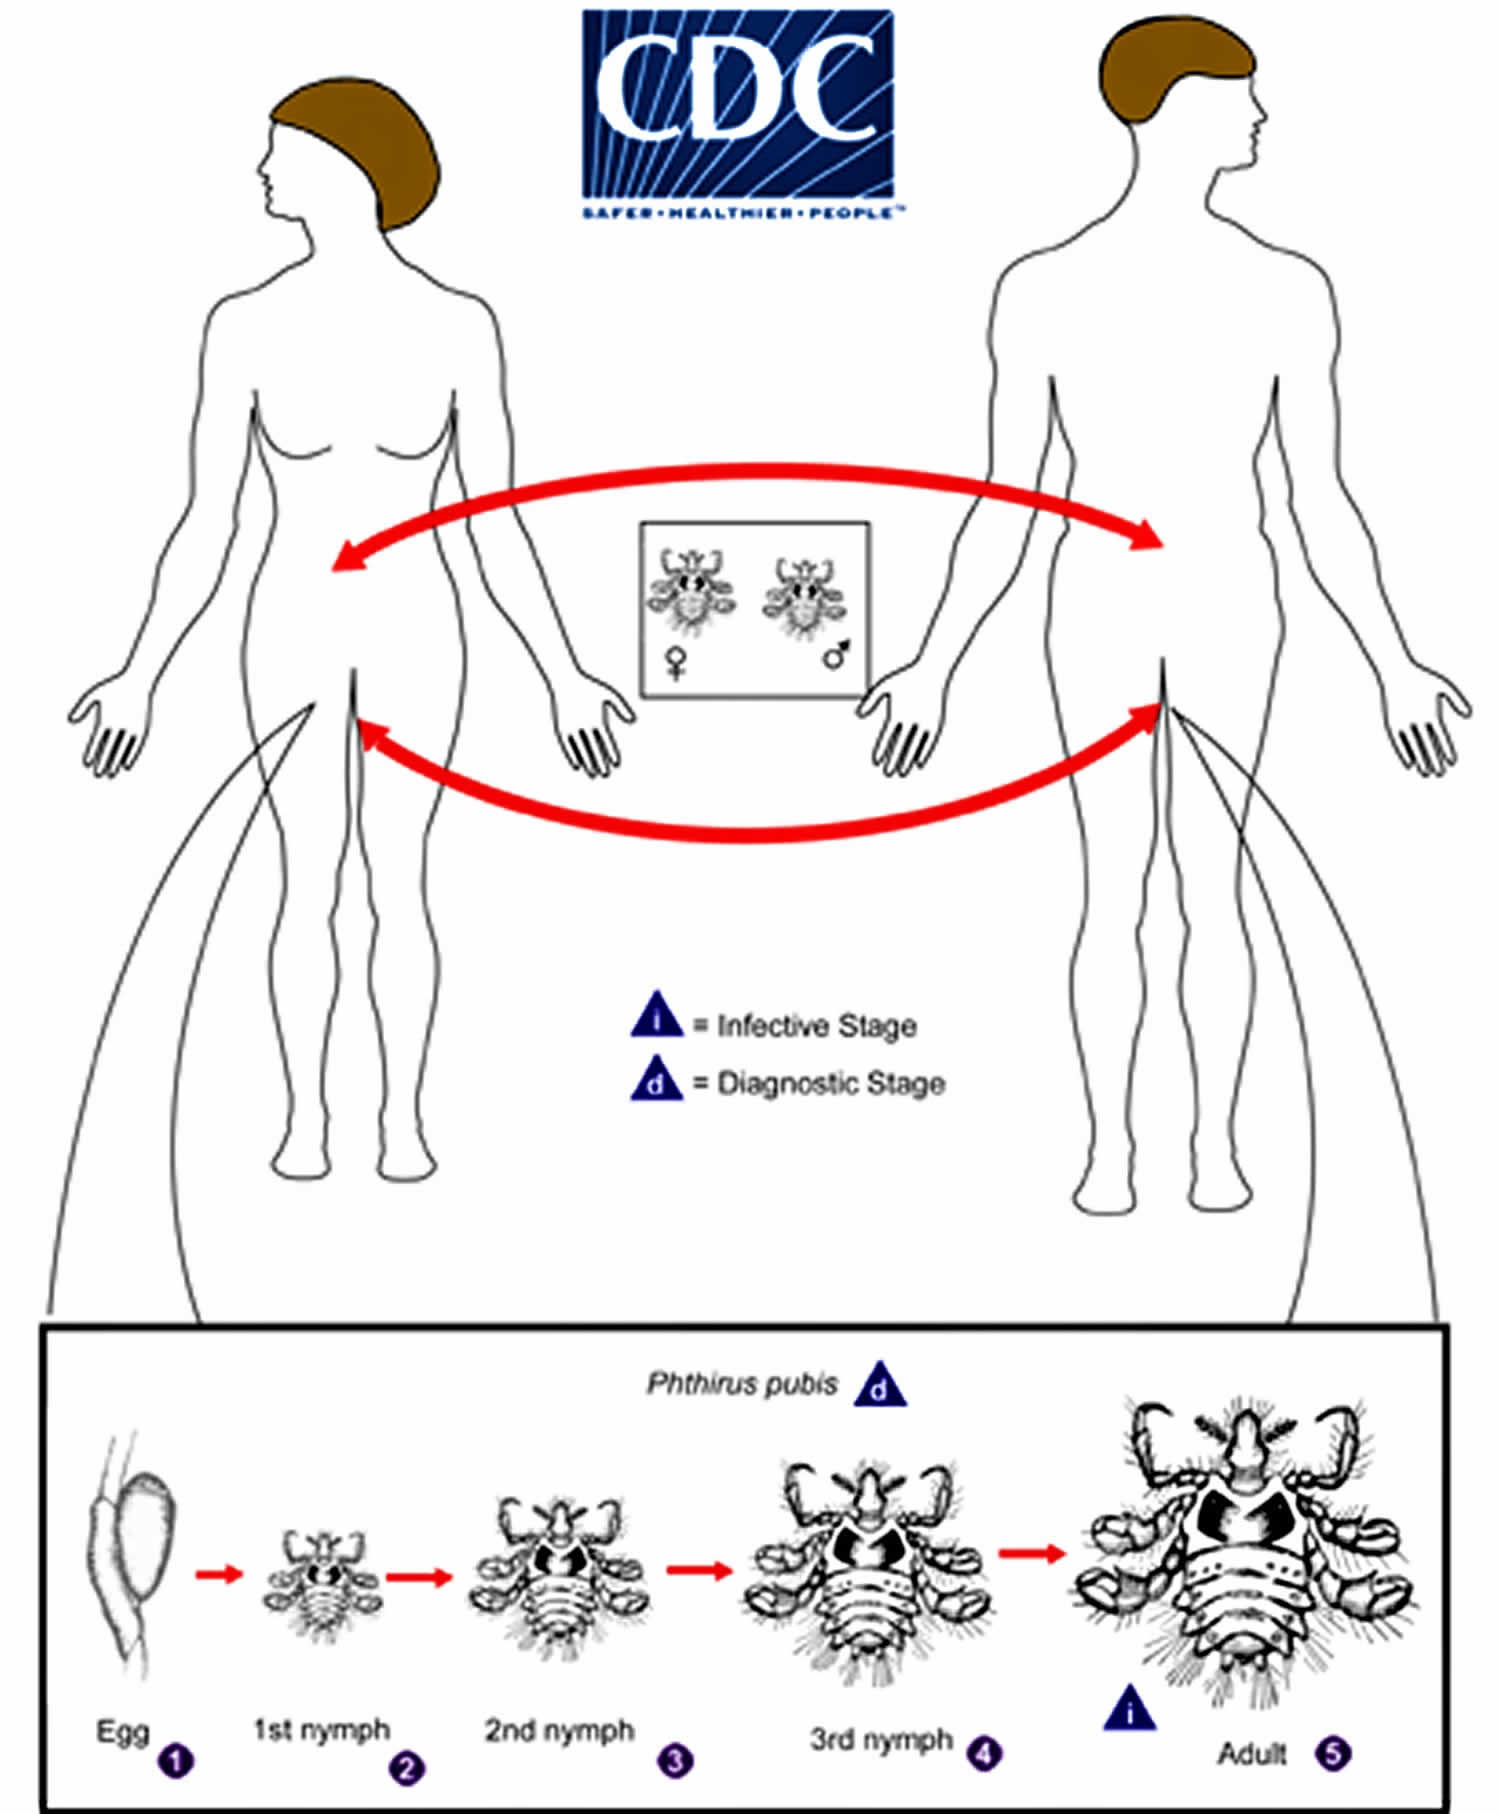 Pediculosis pubis life cycle